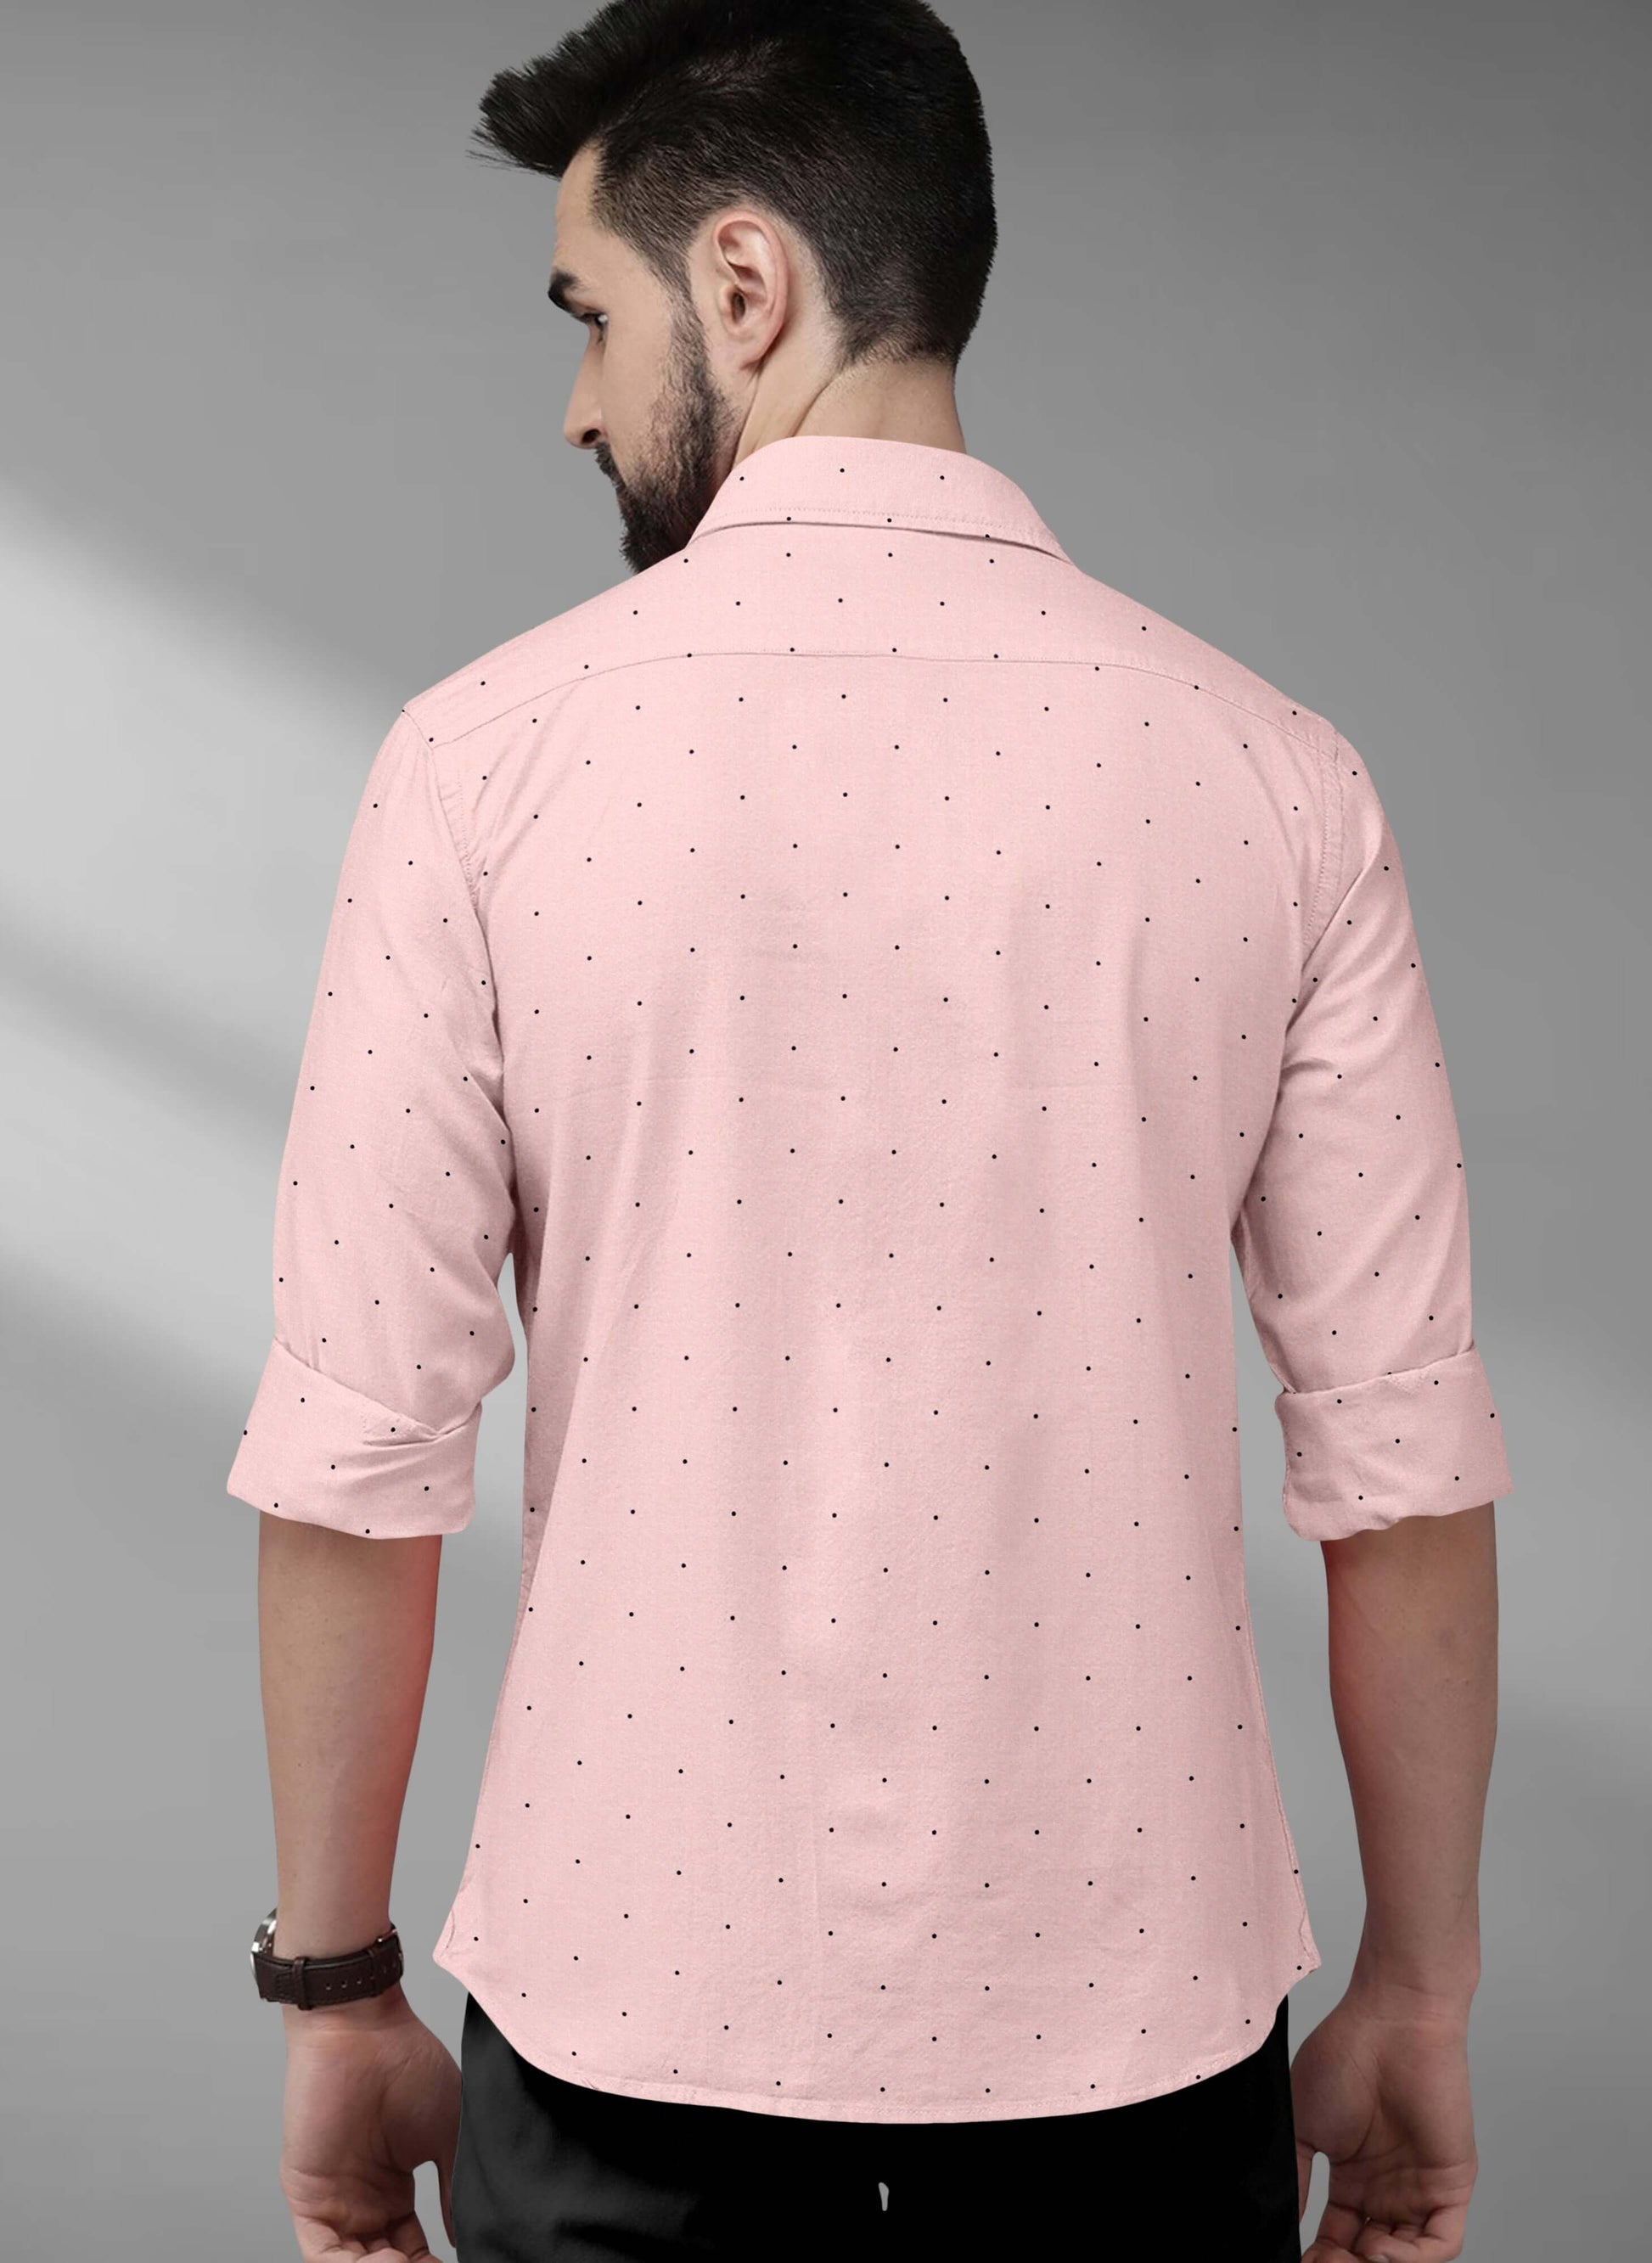 Creole Pink and Black Dotted Cotton Shirt